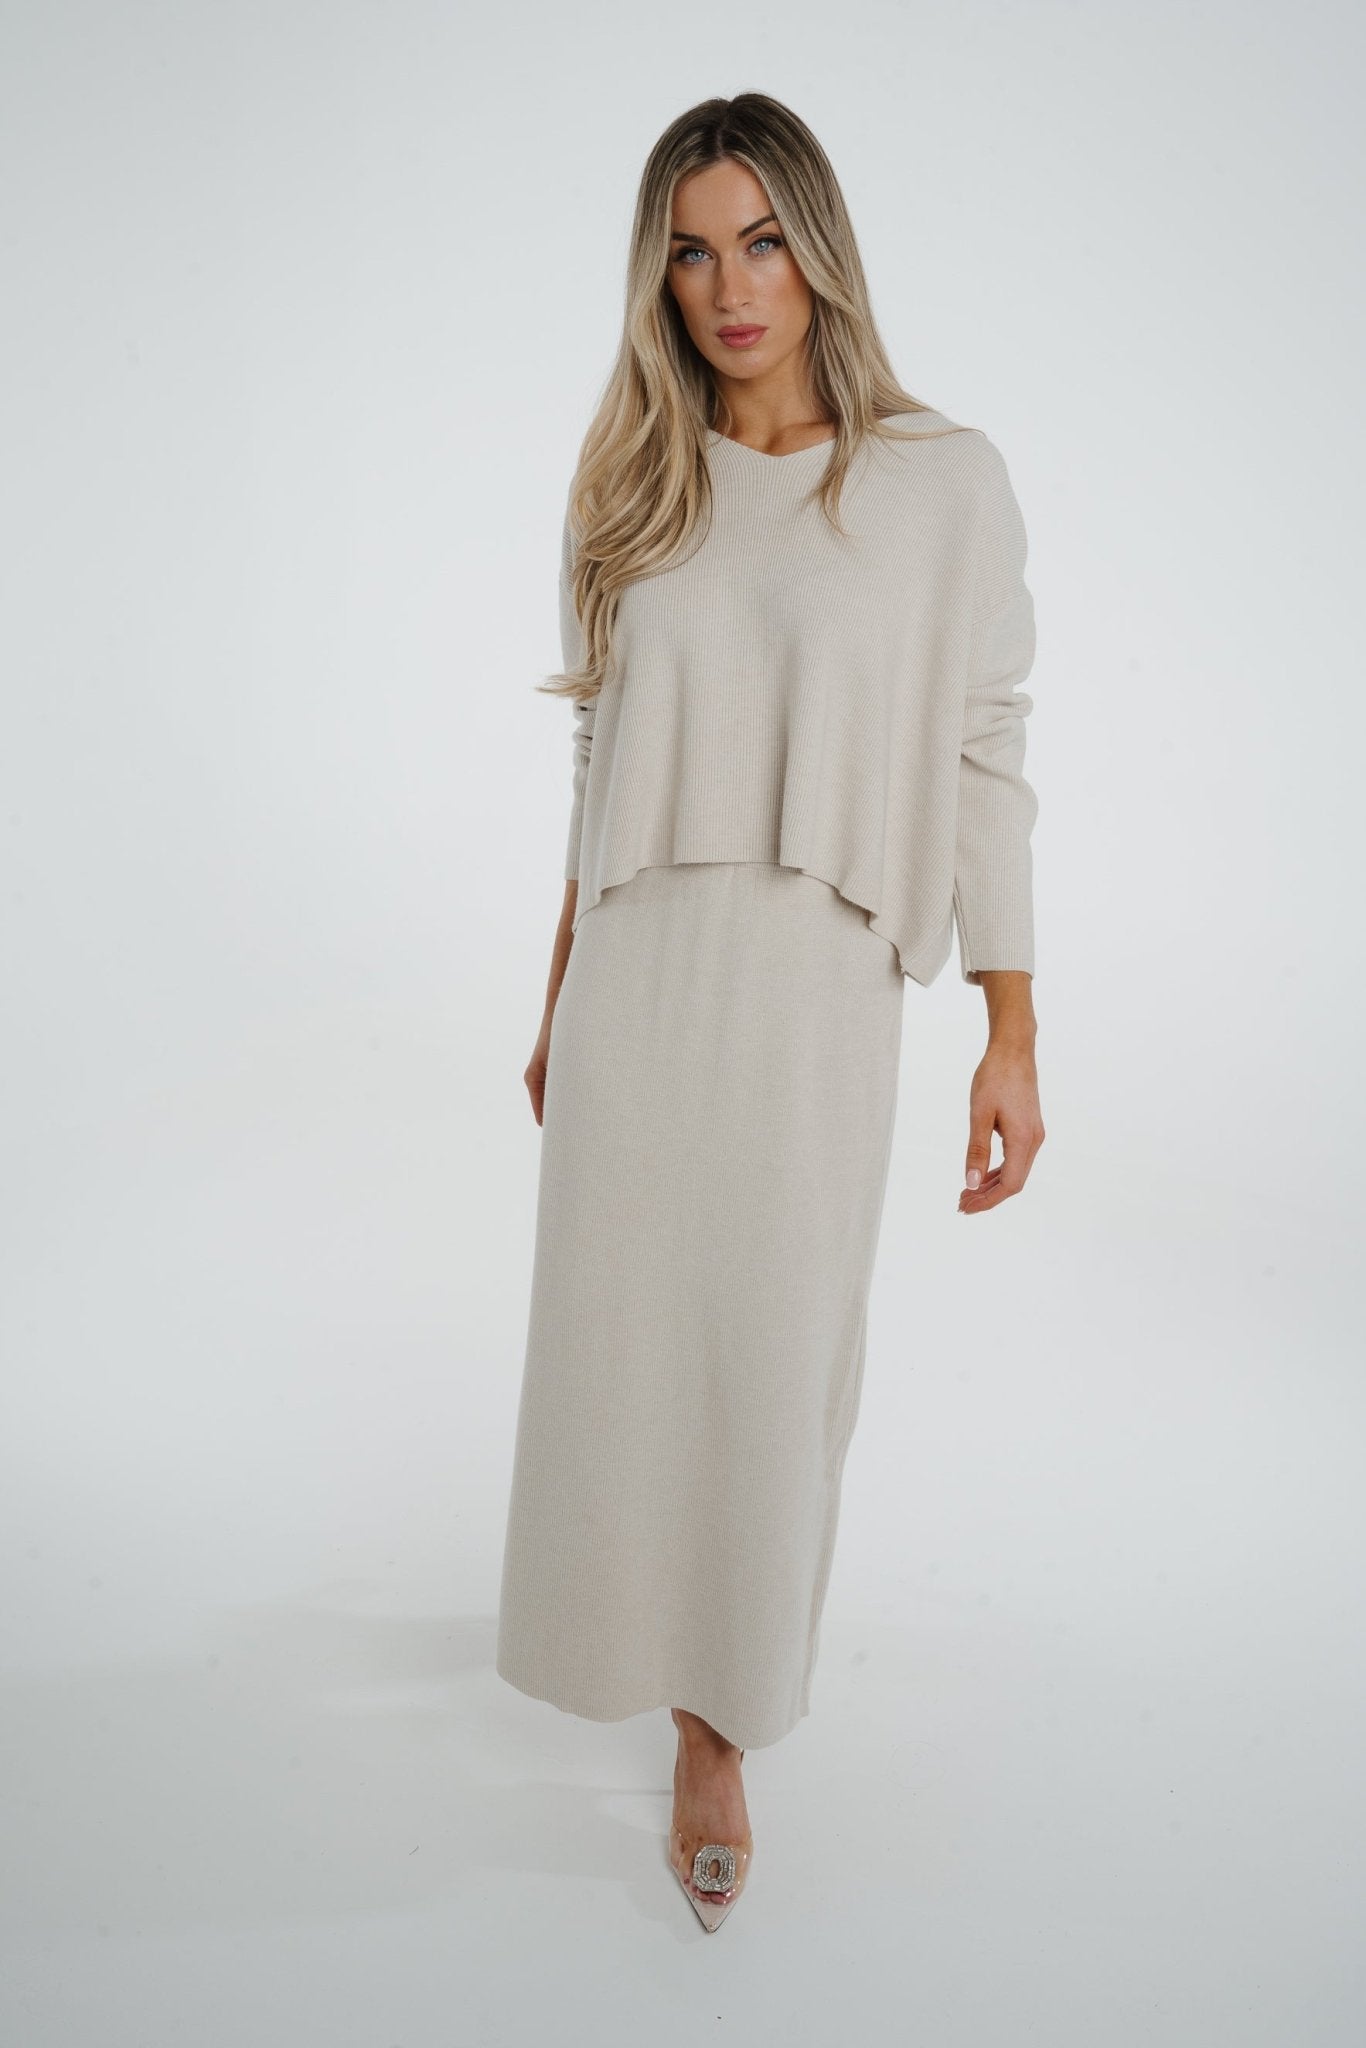 Holly Knit Two Piece In Cream - The Walk in Wardrobe